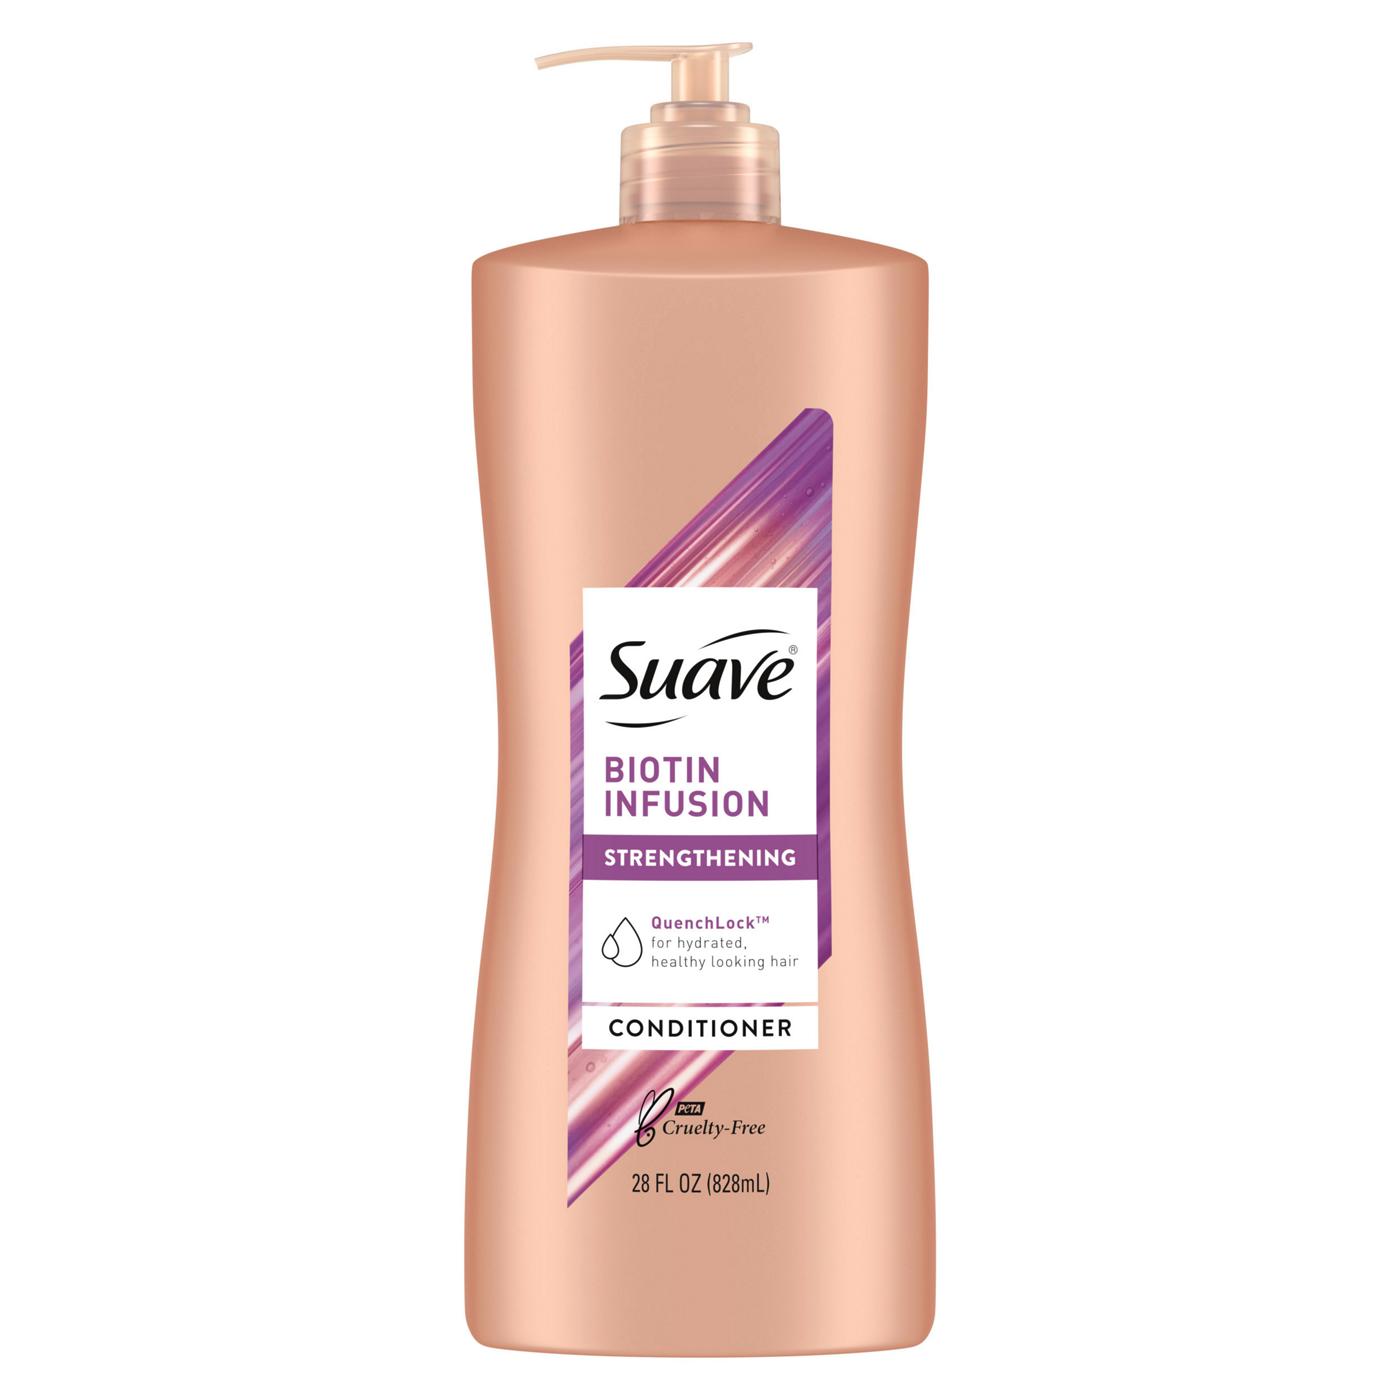 Suave Professionals Biotin Infusion Strengthening Conditioner; image 1 of 11